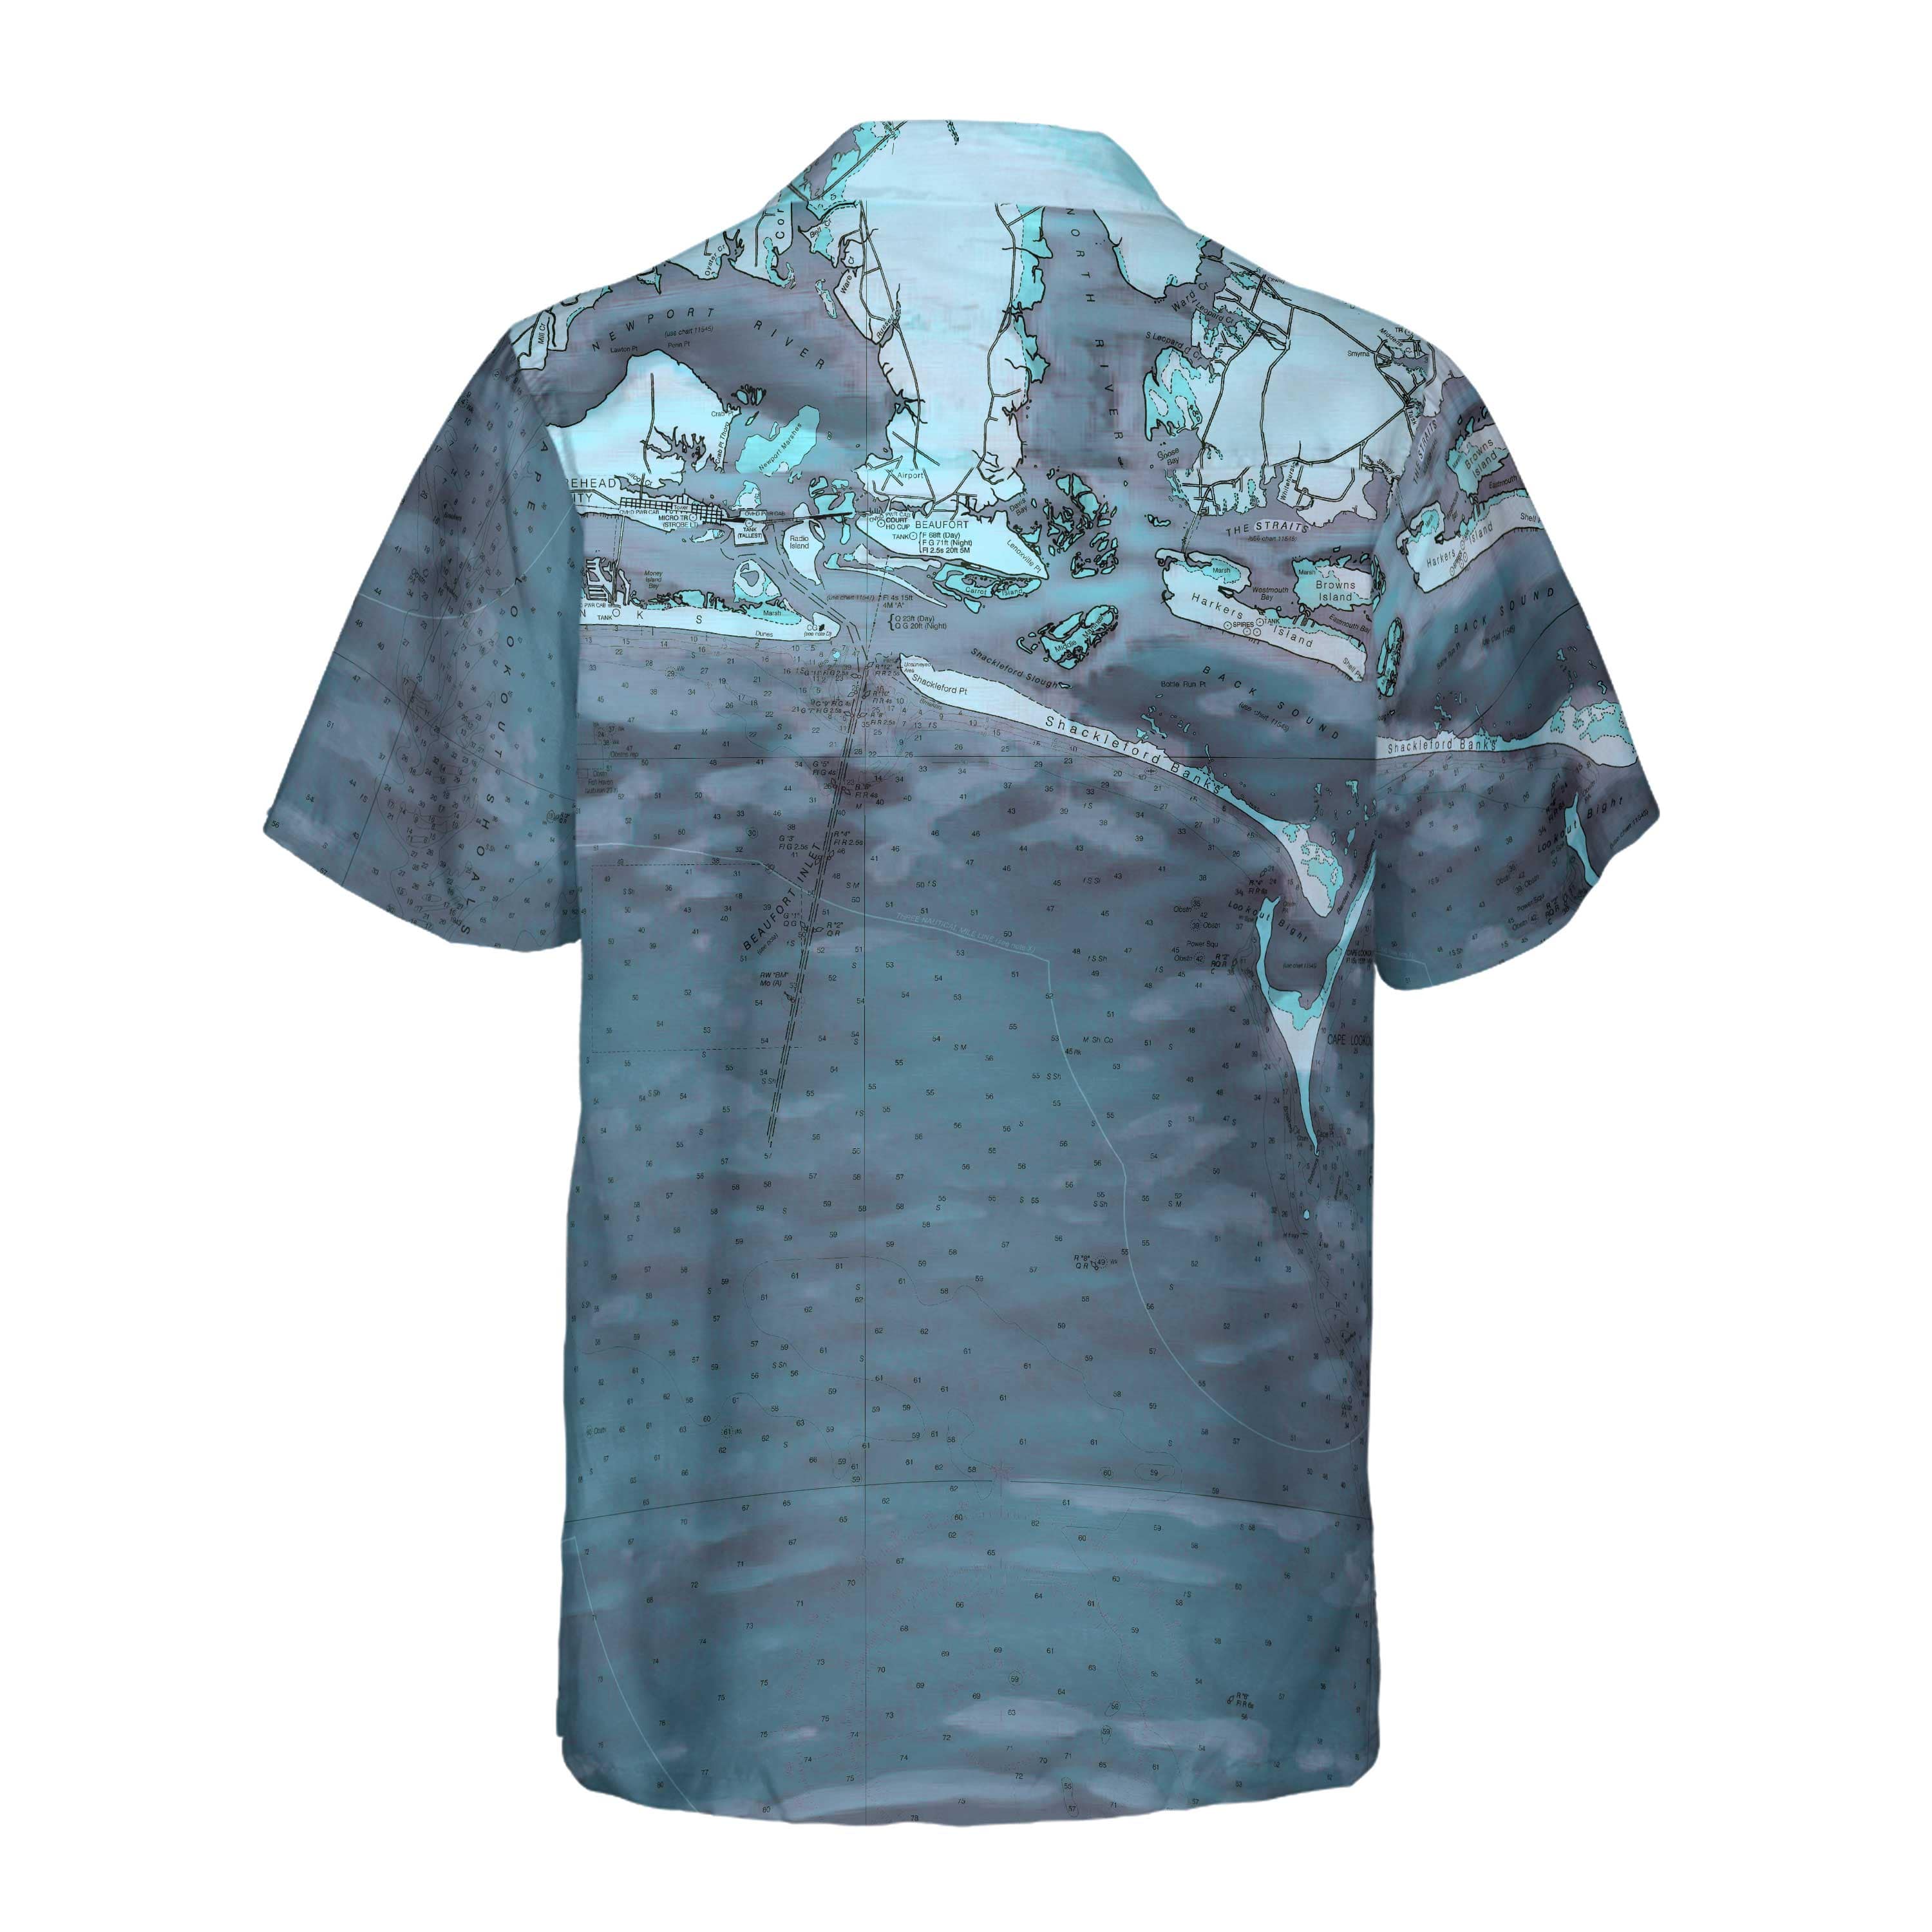 The Seafoam Green Cape Lookout and Beaufort NC Coconut Button Camp Shirt